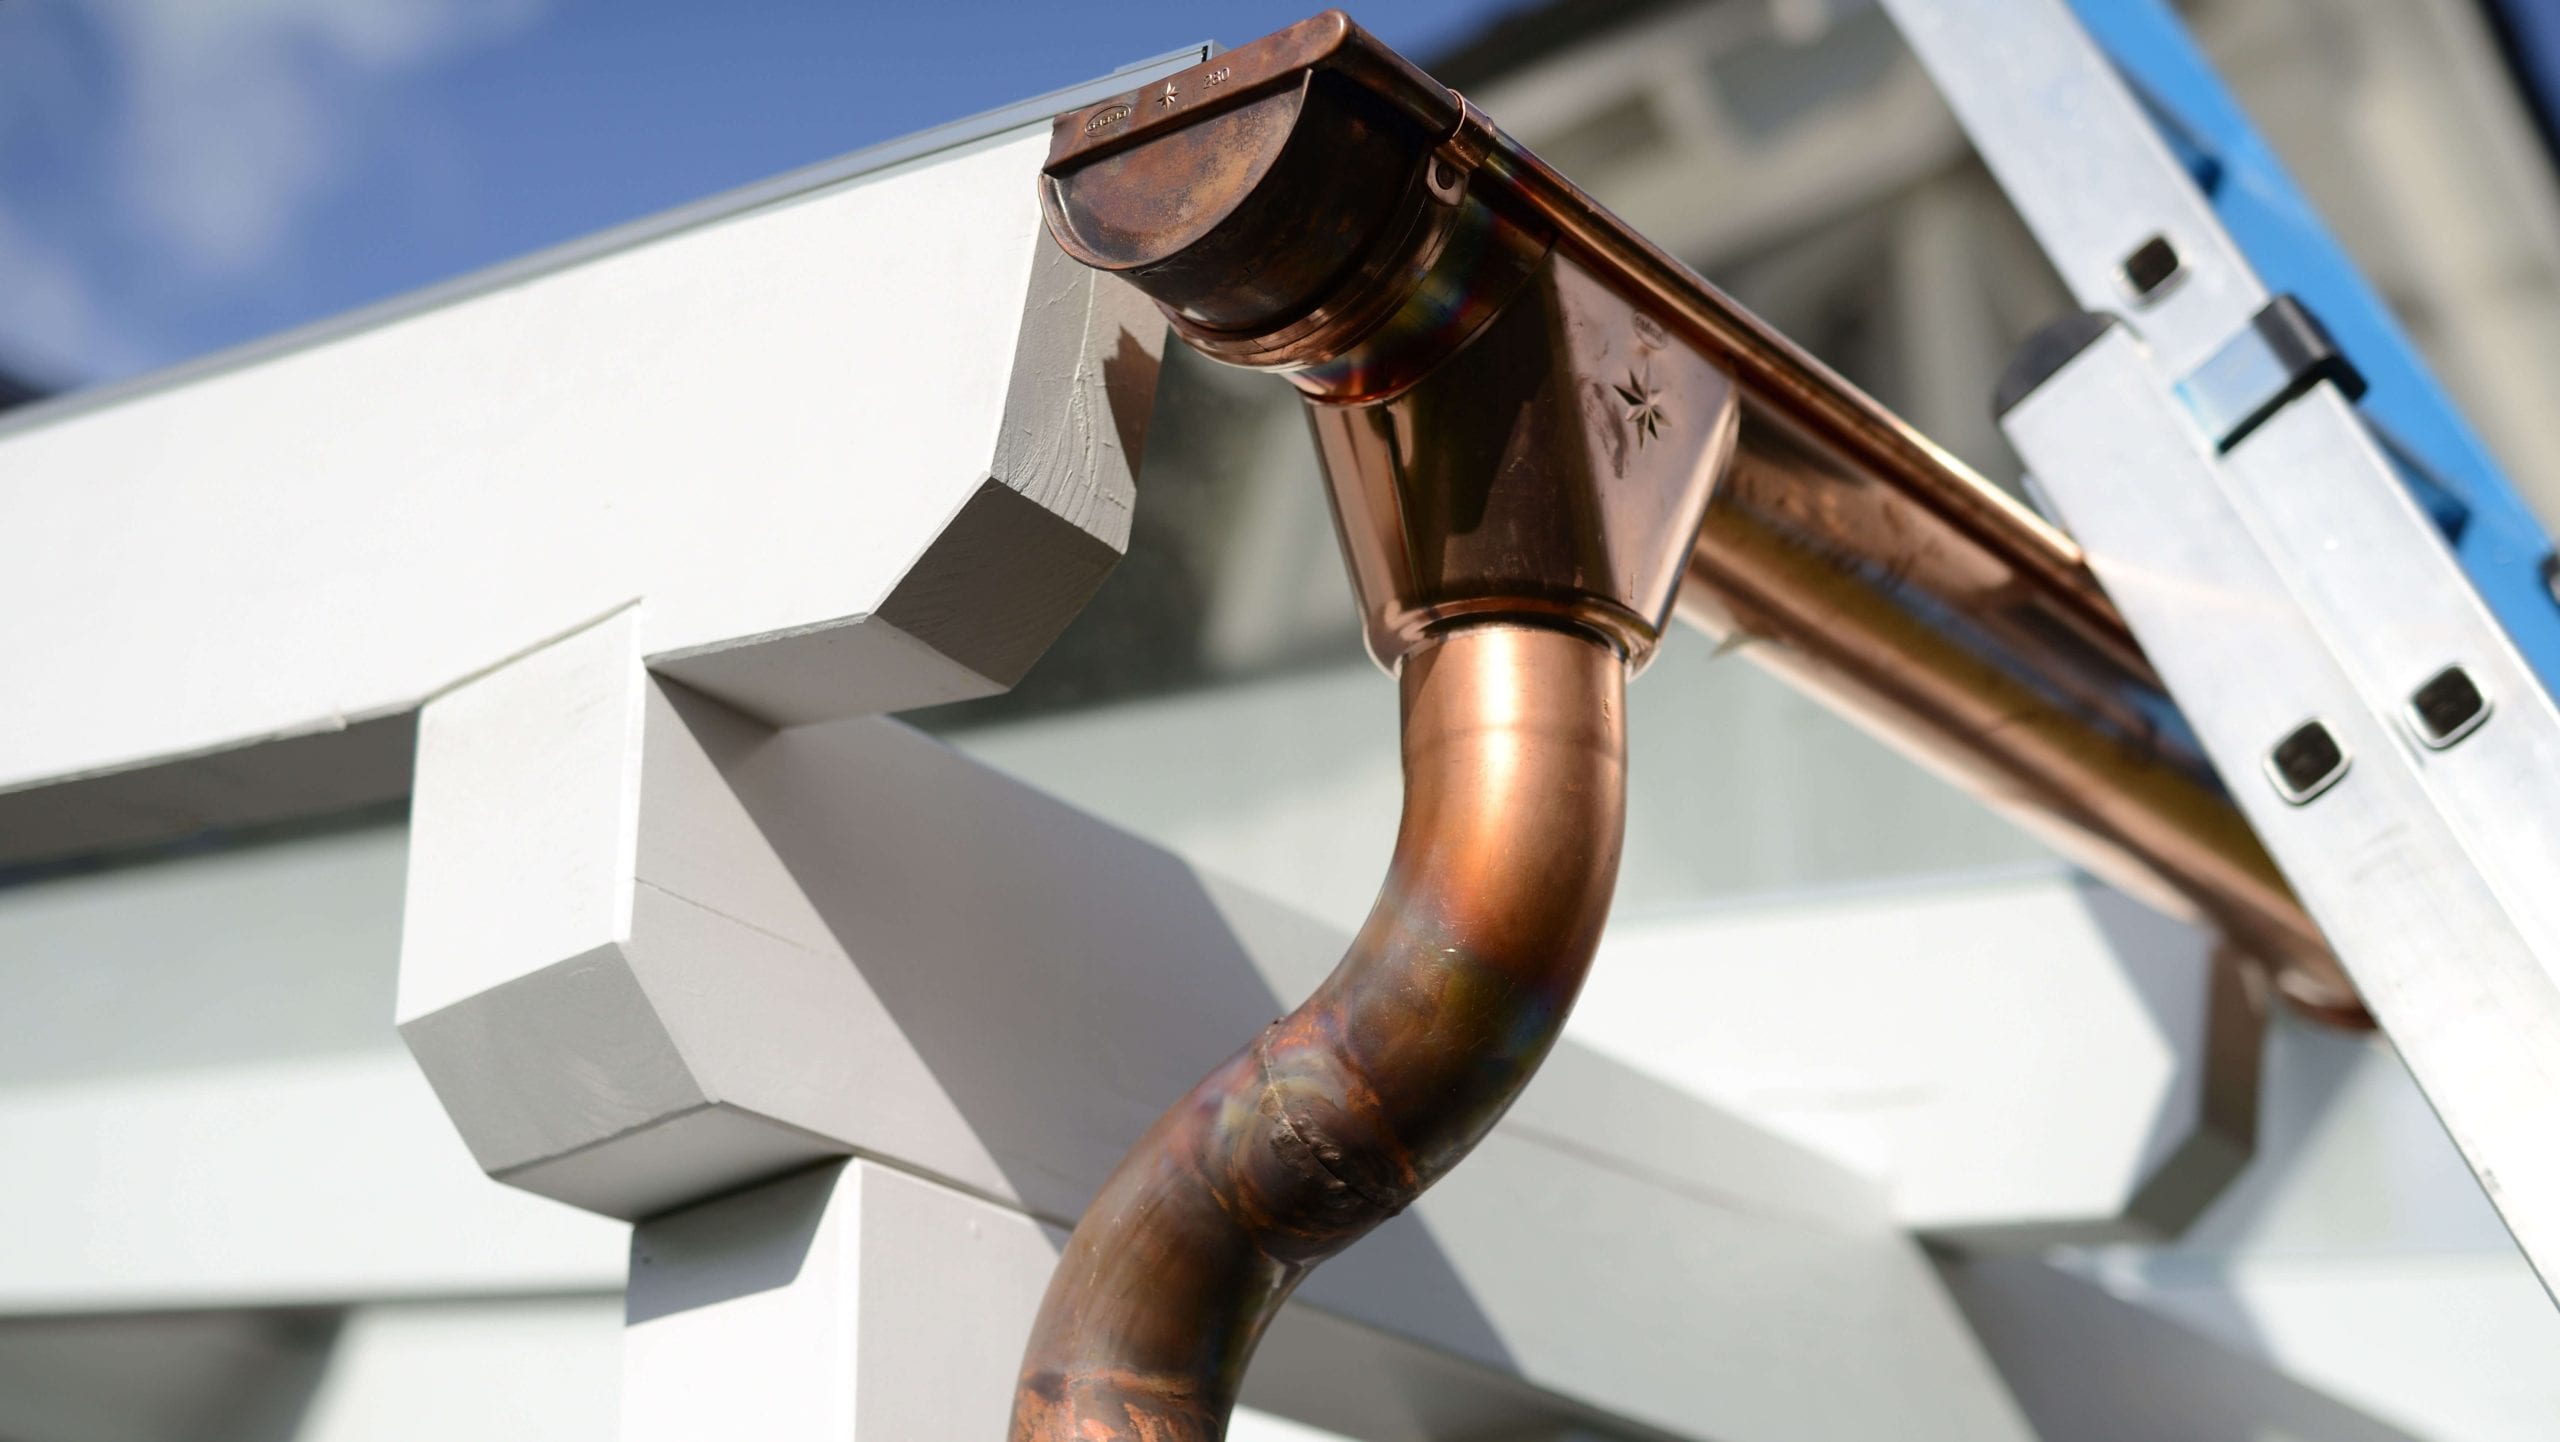 Make your property stand out with copper gutters. Contact for gutter installation in Fort Myers